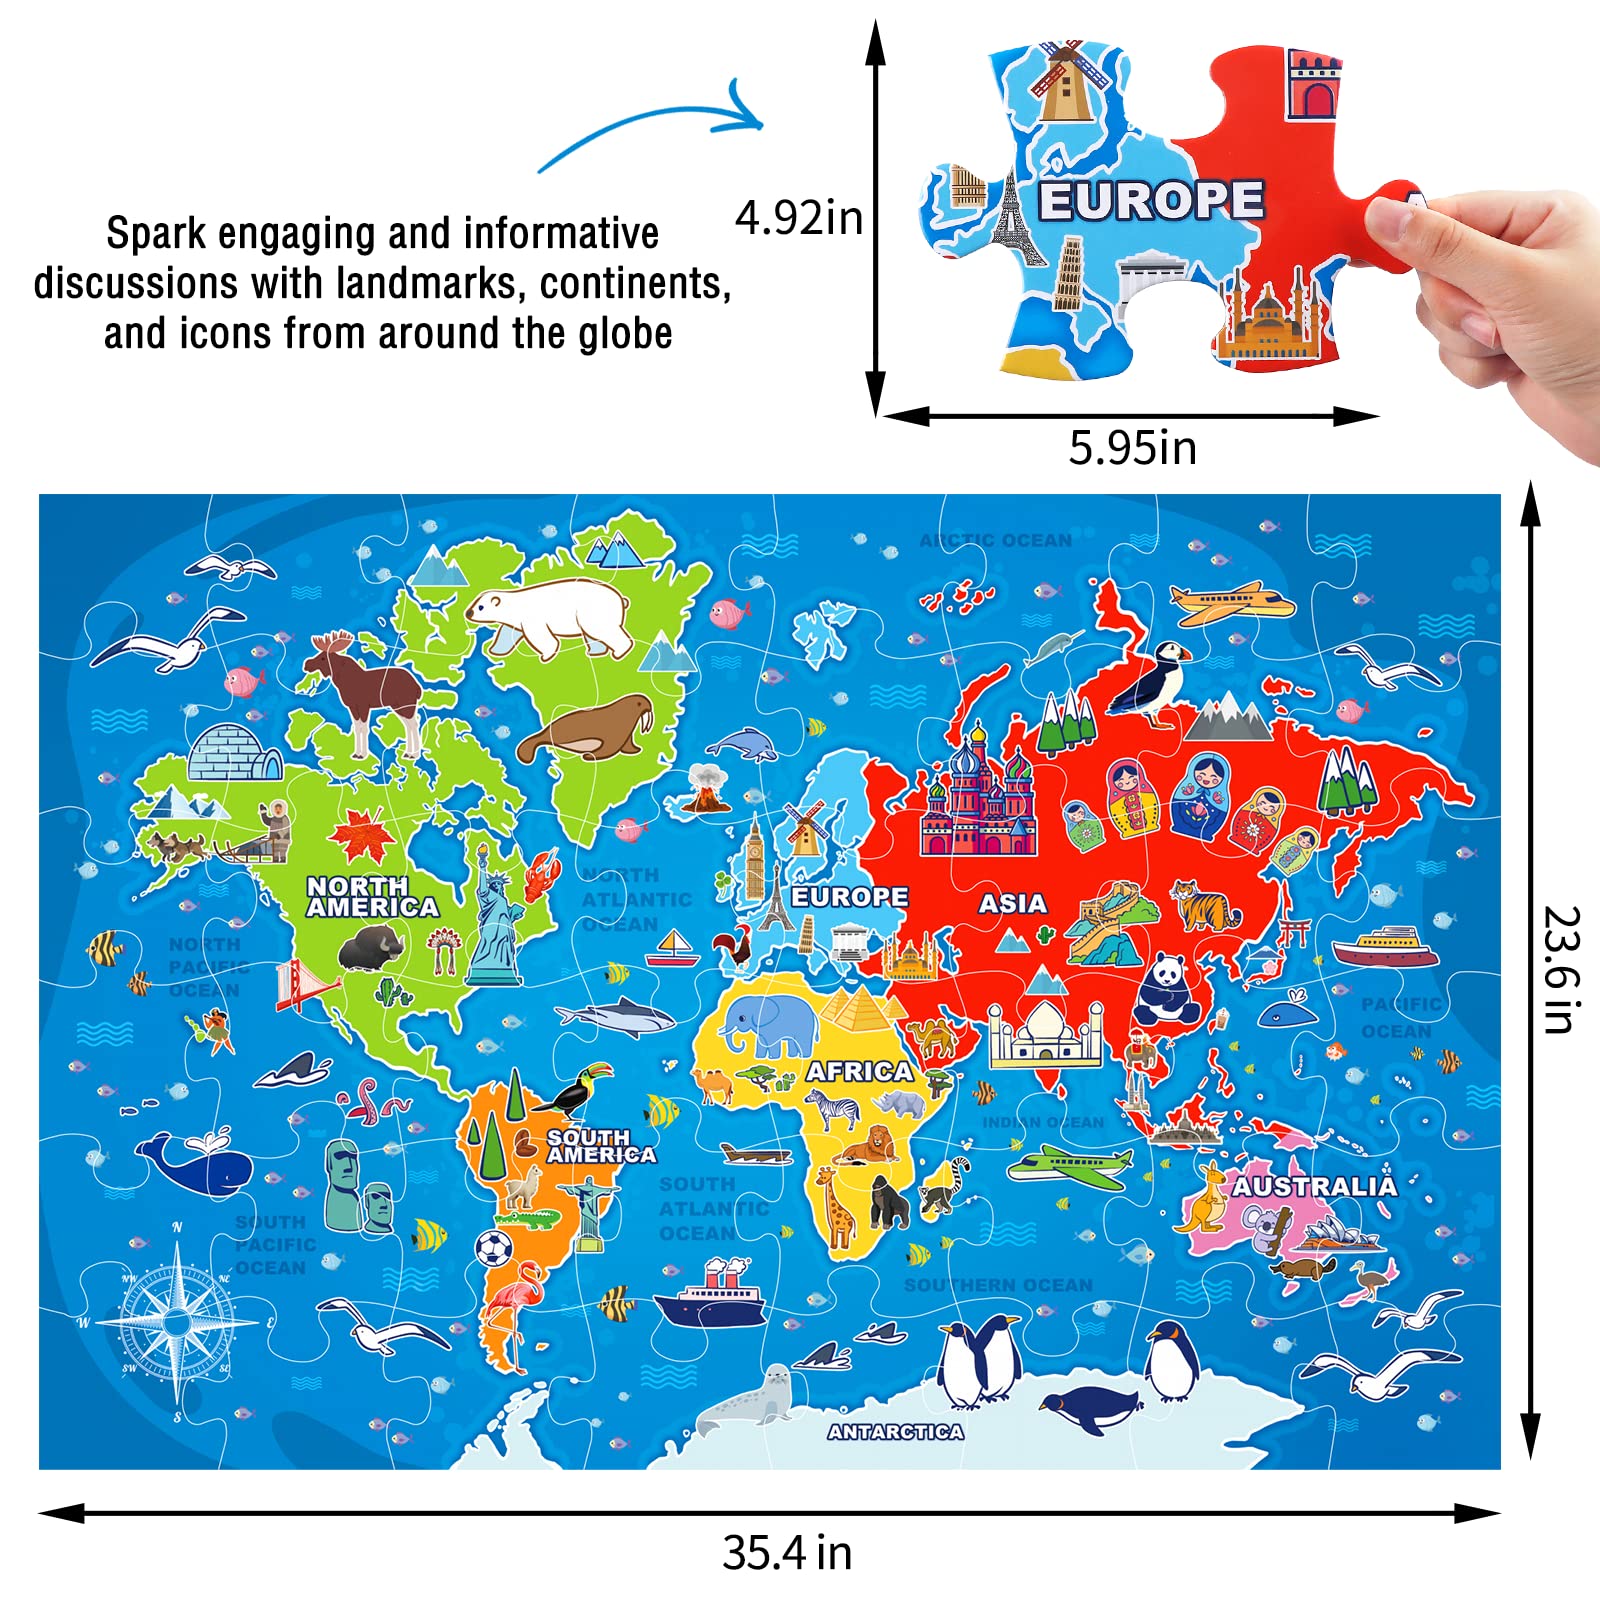 Jumbo Floor Puzzle for Kids,World Map Puzzle Jigsaw Geography Puzzles,48 Piece Globe Atlas Puzzle with Continents,Puzzle for Toddler Ages 3-5,Preschool Learning Toys Gift for 4-8 Years Old